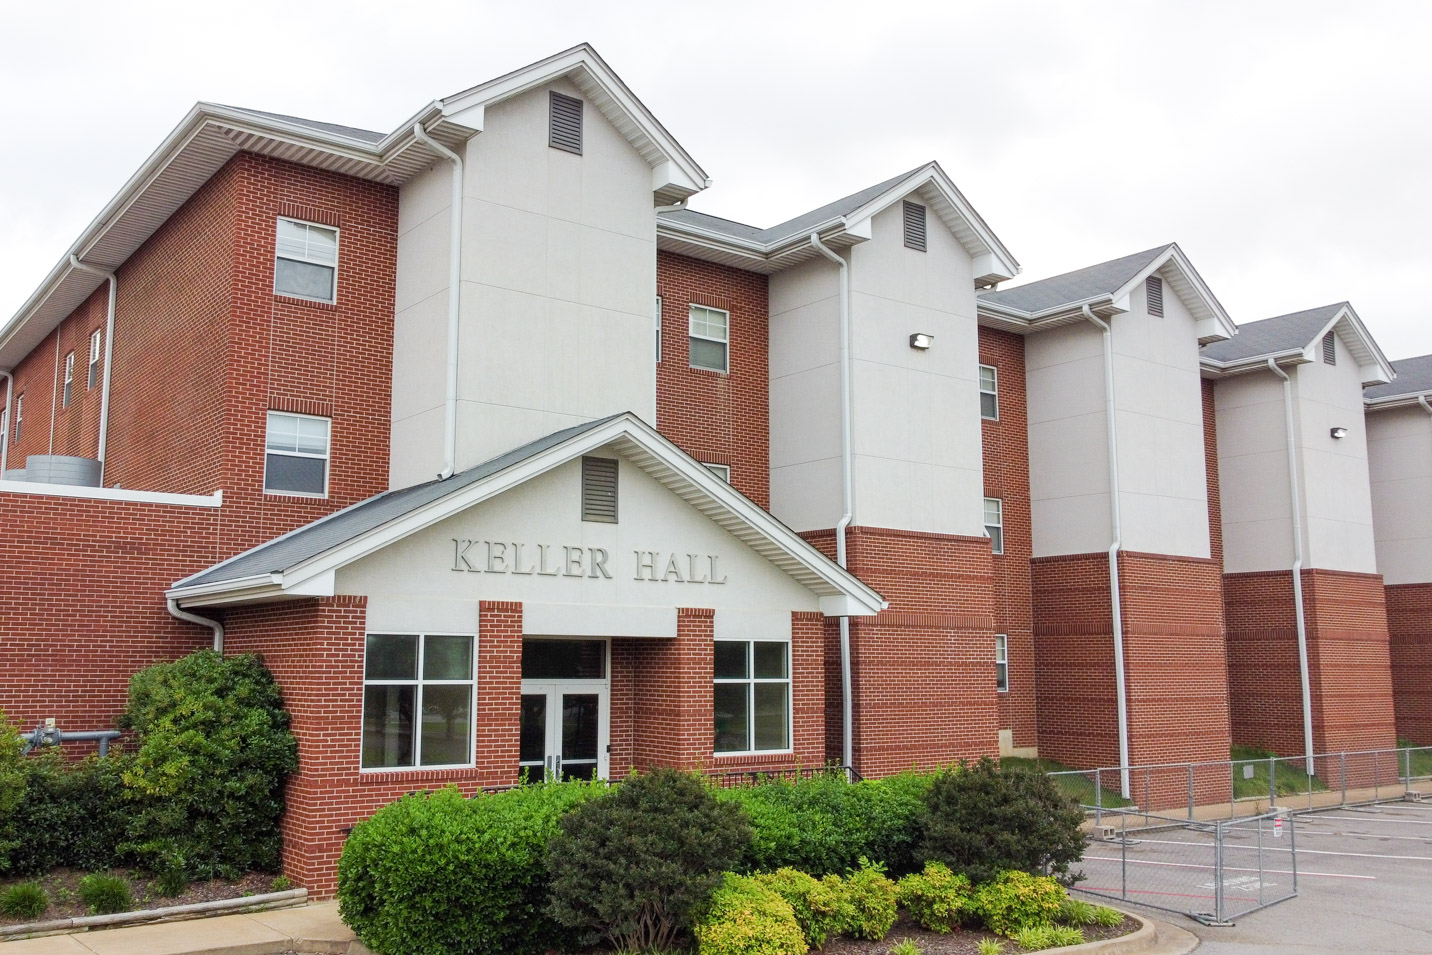 This is a photo of Keller Hall, a men's residence hall at Harding University.